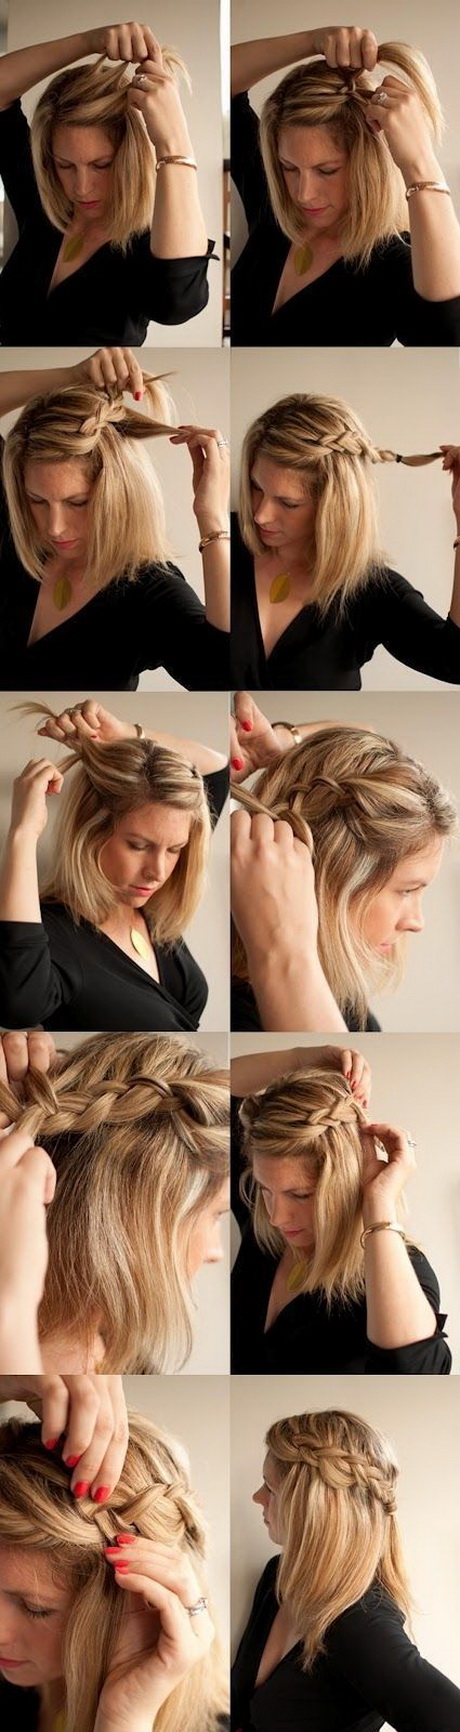 Images of hairstyles for girls images-of-hairstyles-for-girls-21